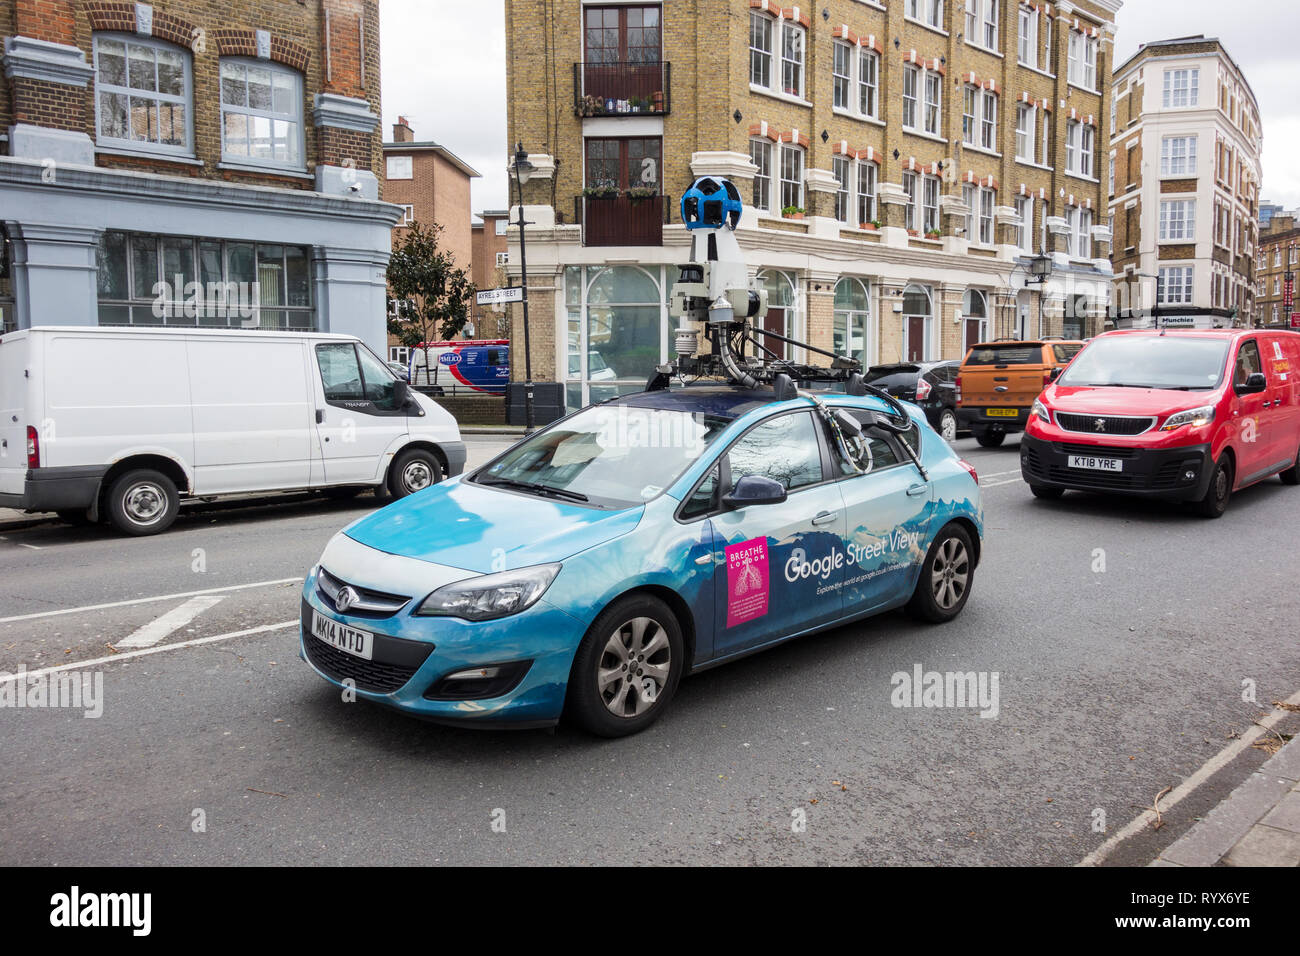 Google Street View car and 360 degree camera in south east London, UK Stock Photo